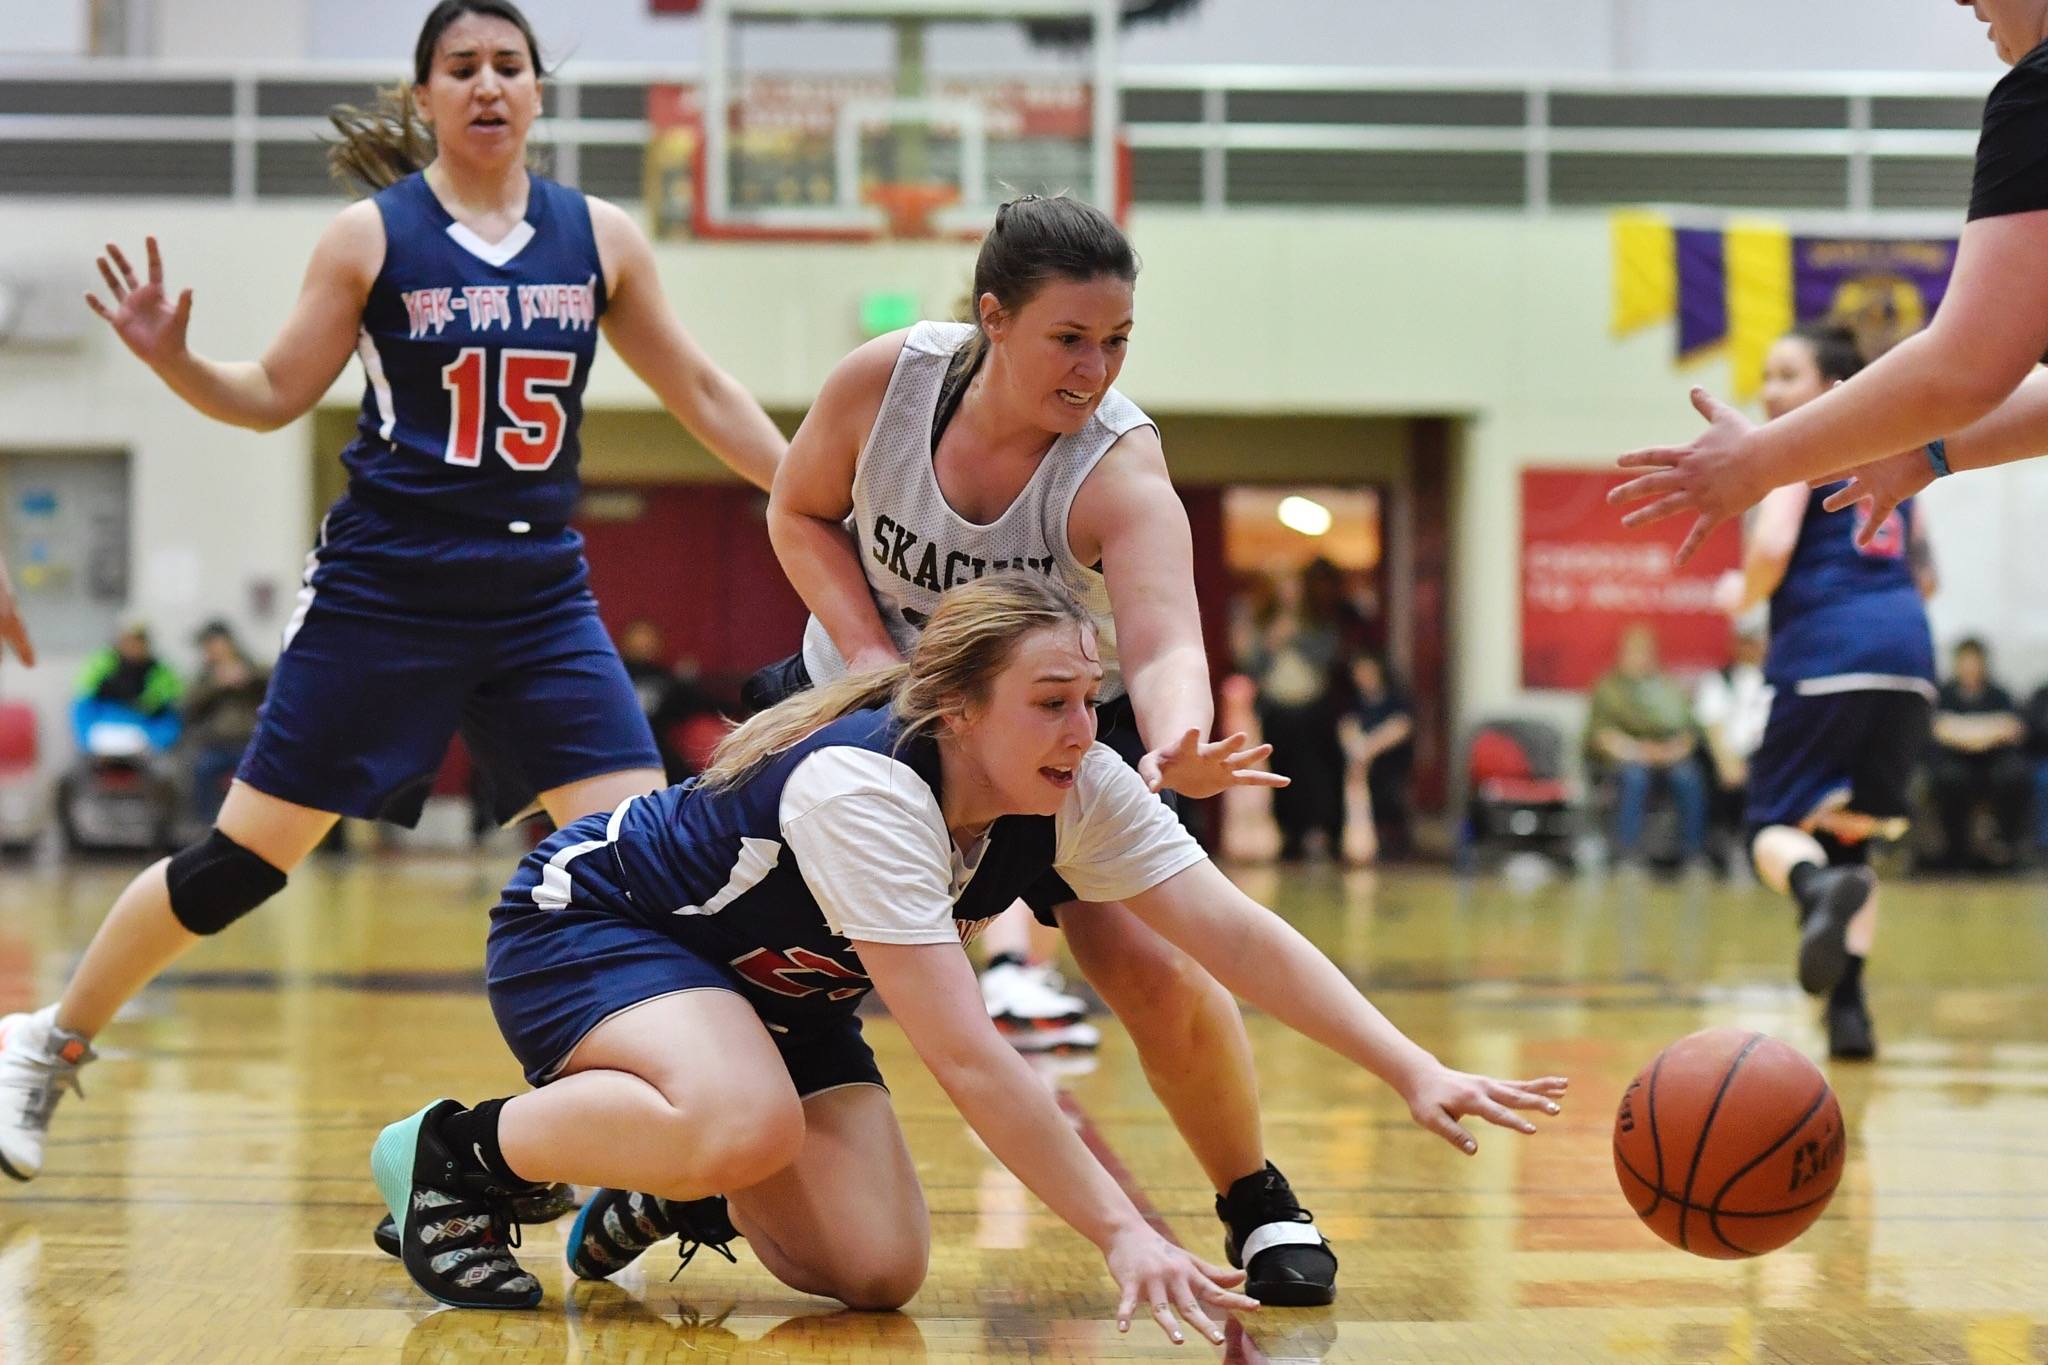 Yakutat’s Janie Jensen, bottom, and Skagway’s Tiffanie Ames dive for a loose ball during their women’s bracket game at the Lions Club’s Gold Medal Basketball Tournament on Thursday, March 21, 2019. (Michael Penn | Juneau Empire)